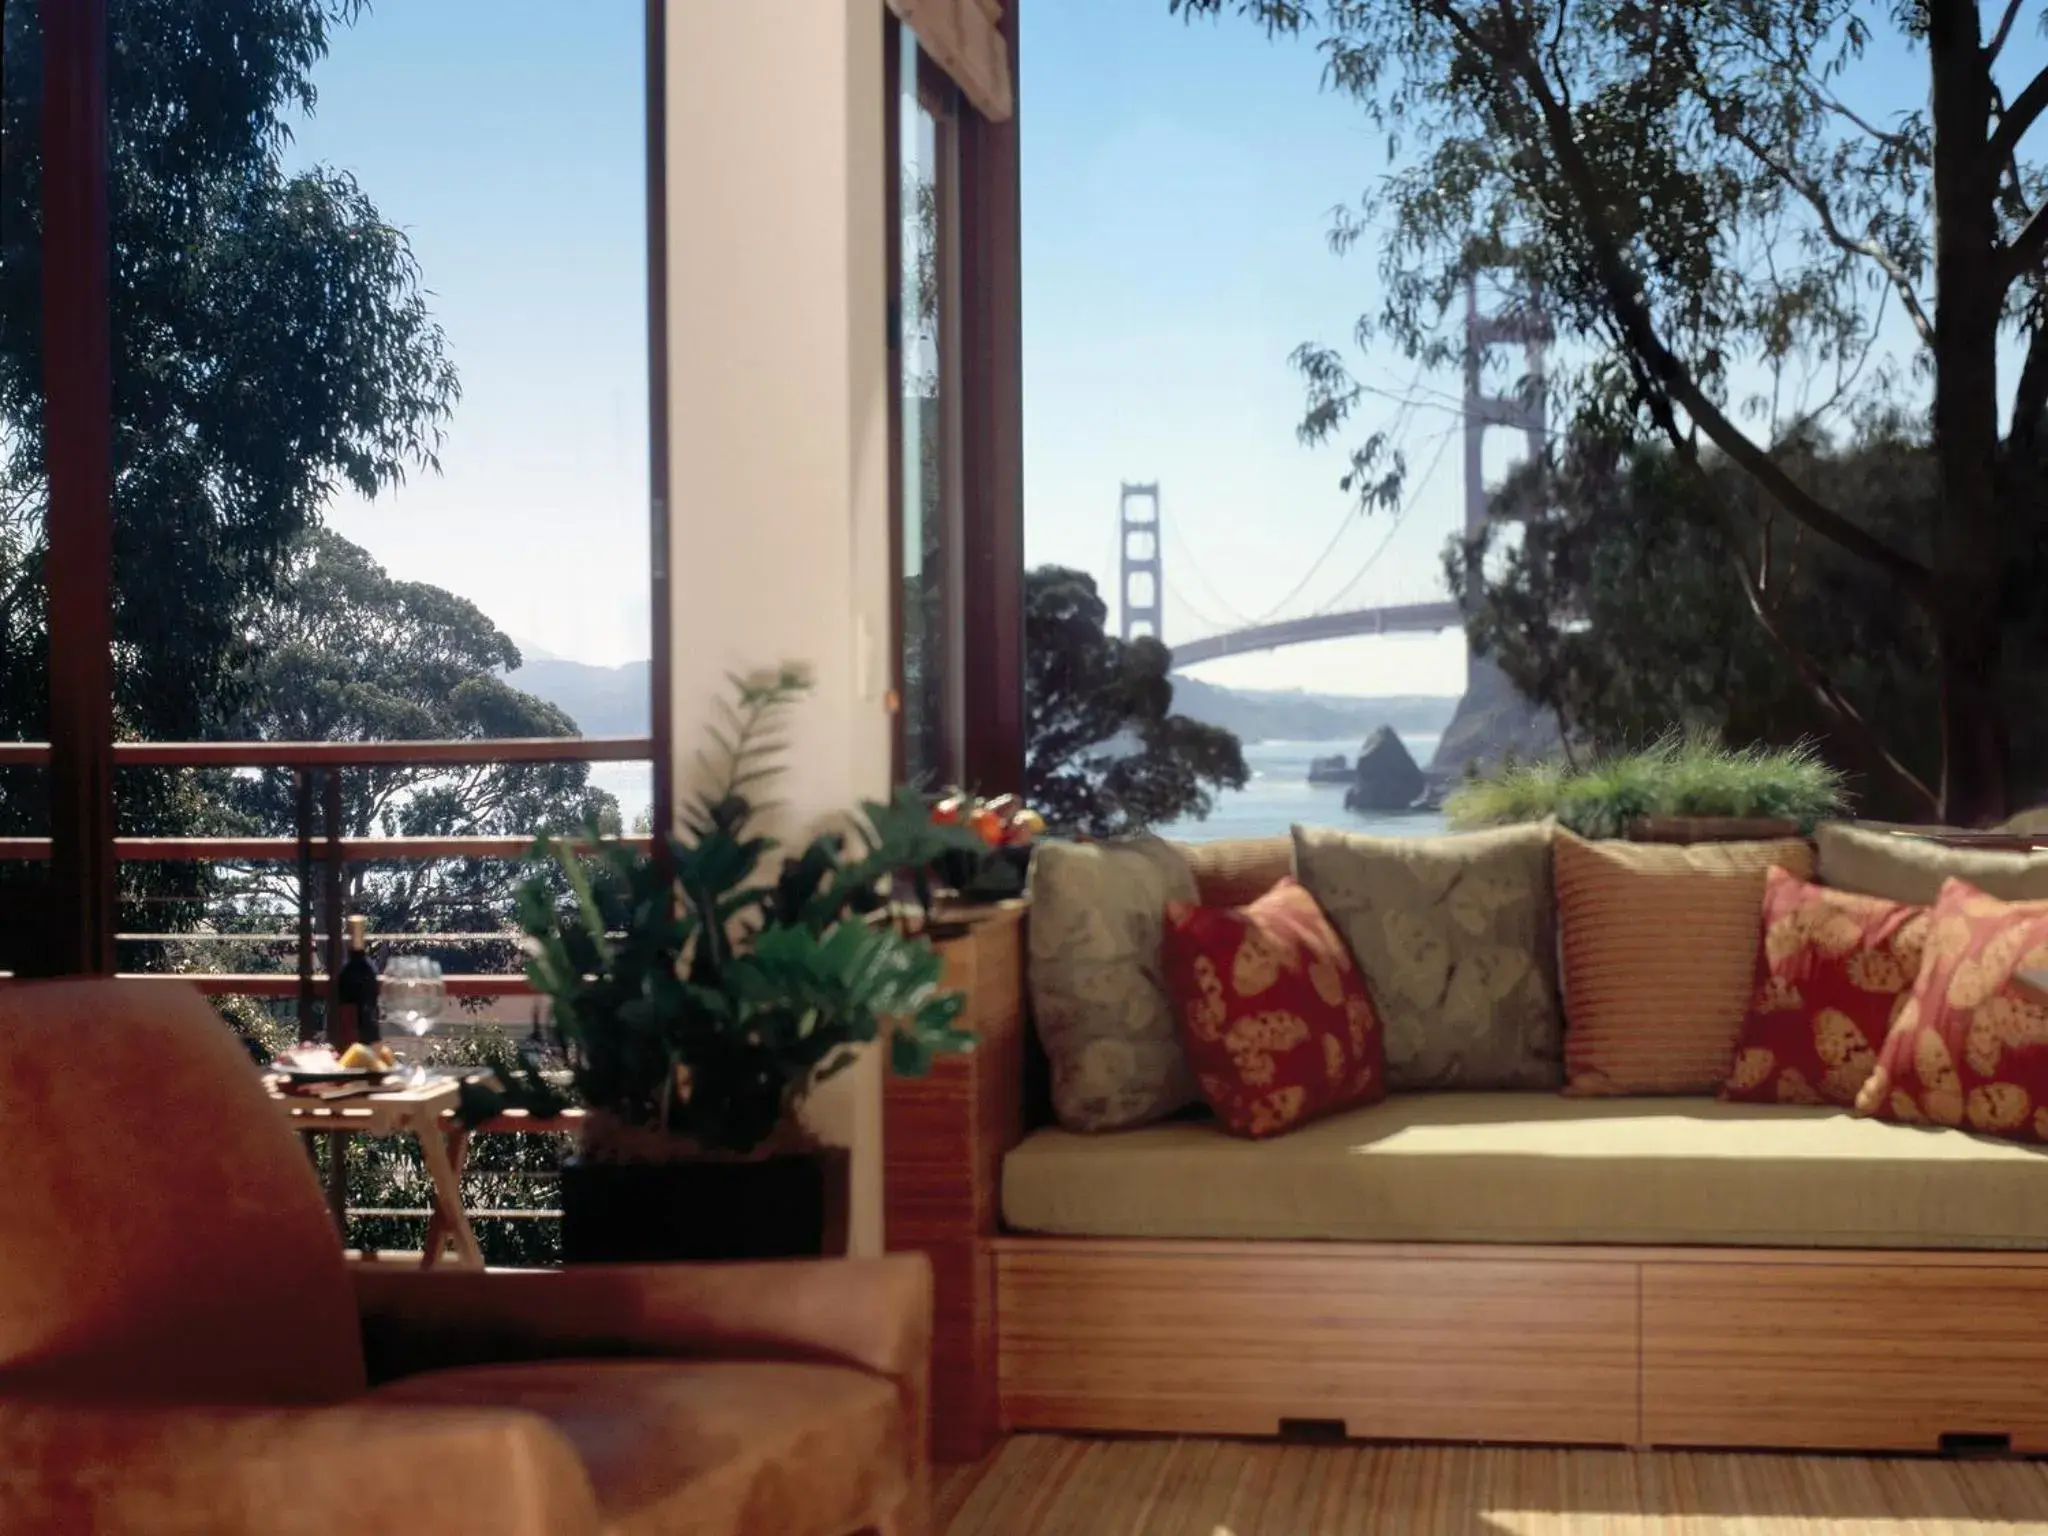 Restaurant/places to eat in Cavallo Point